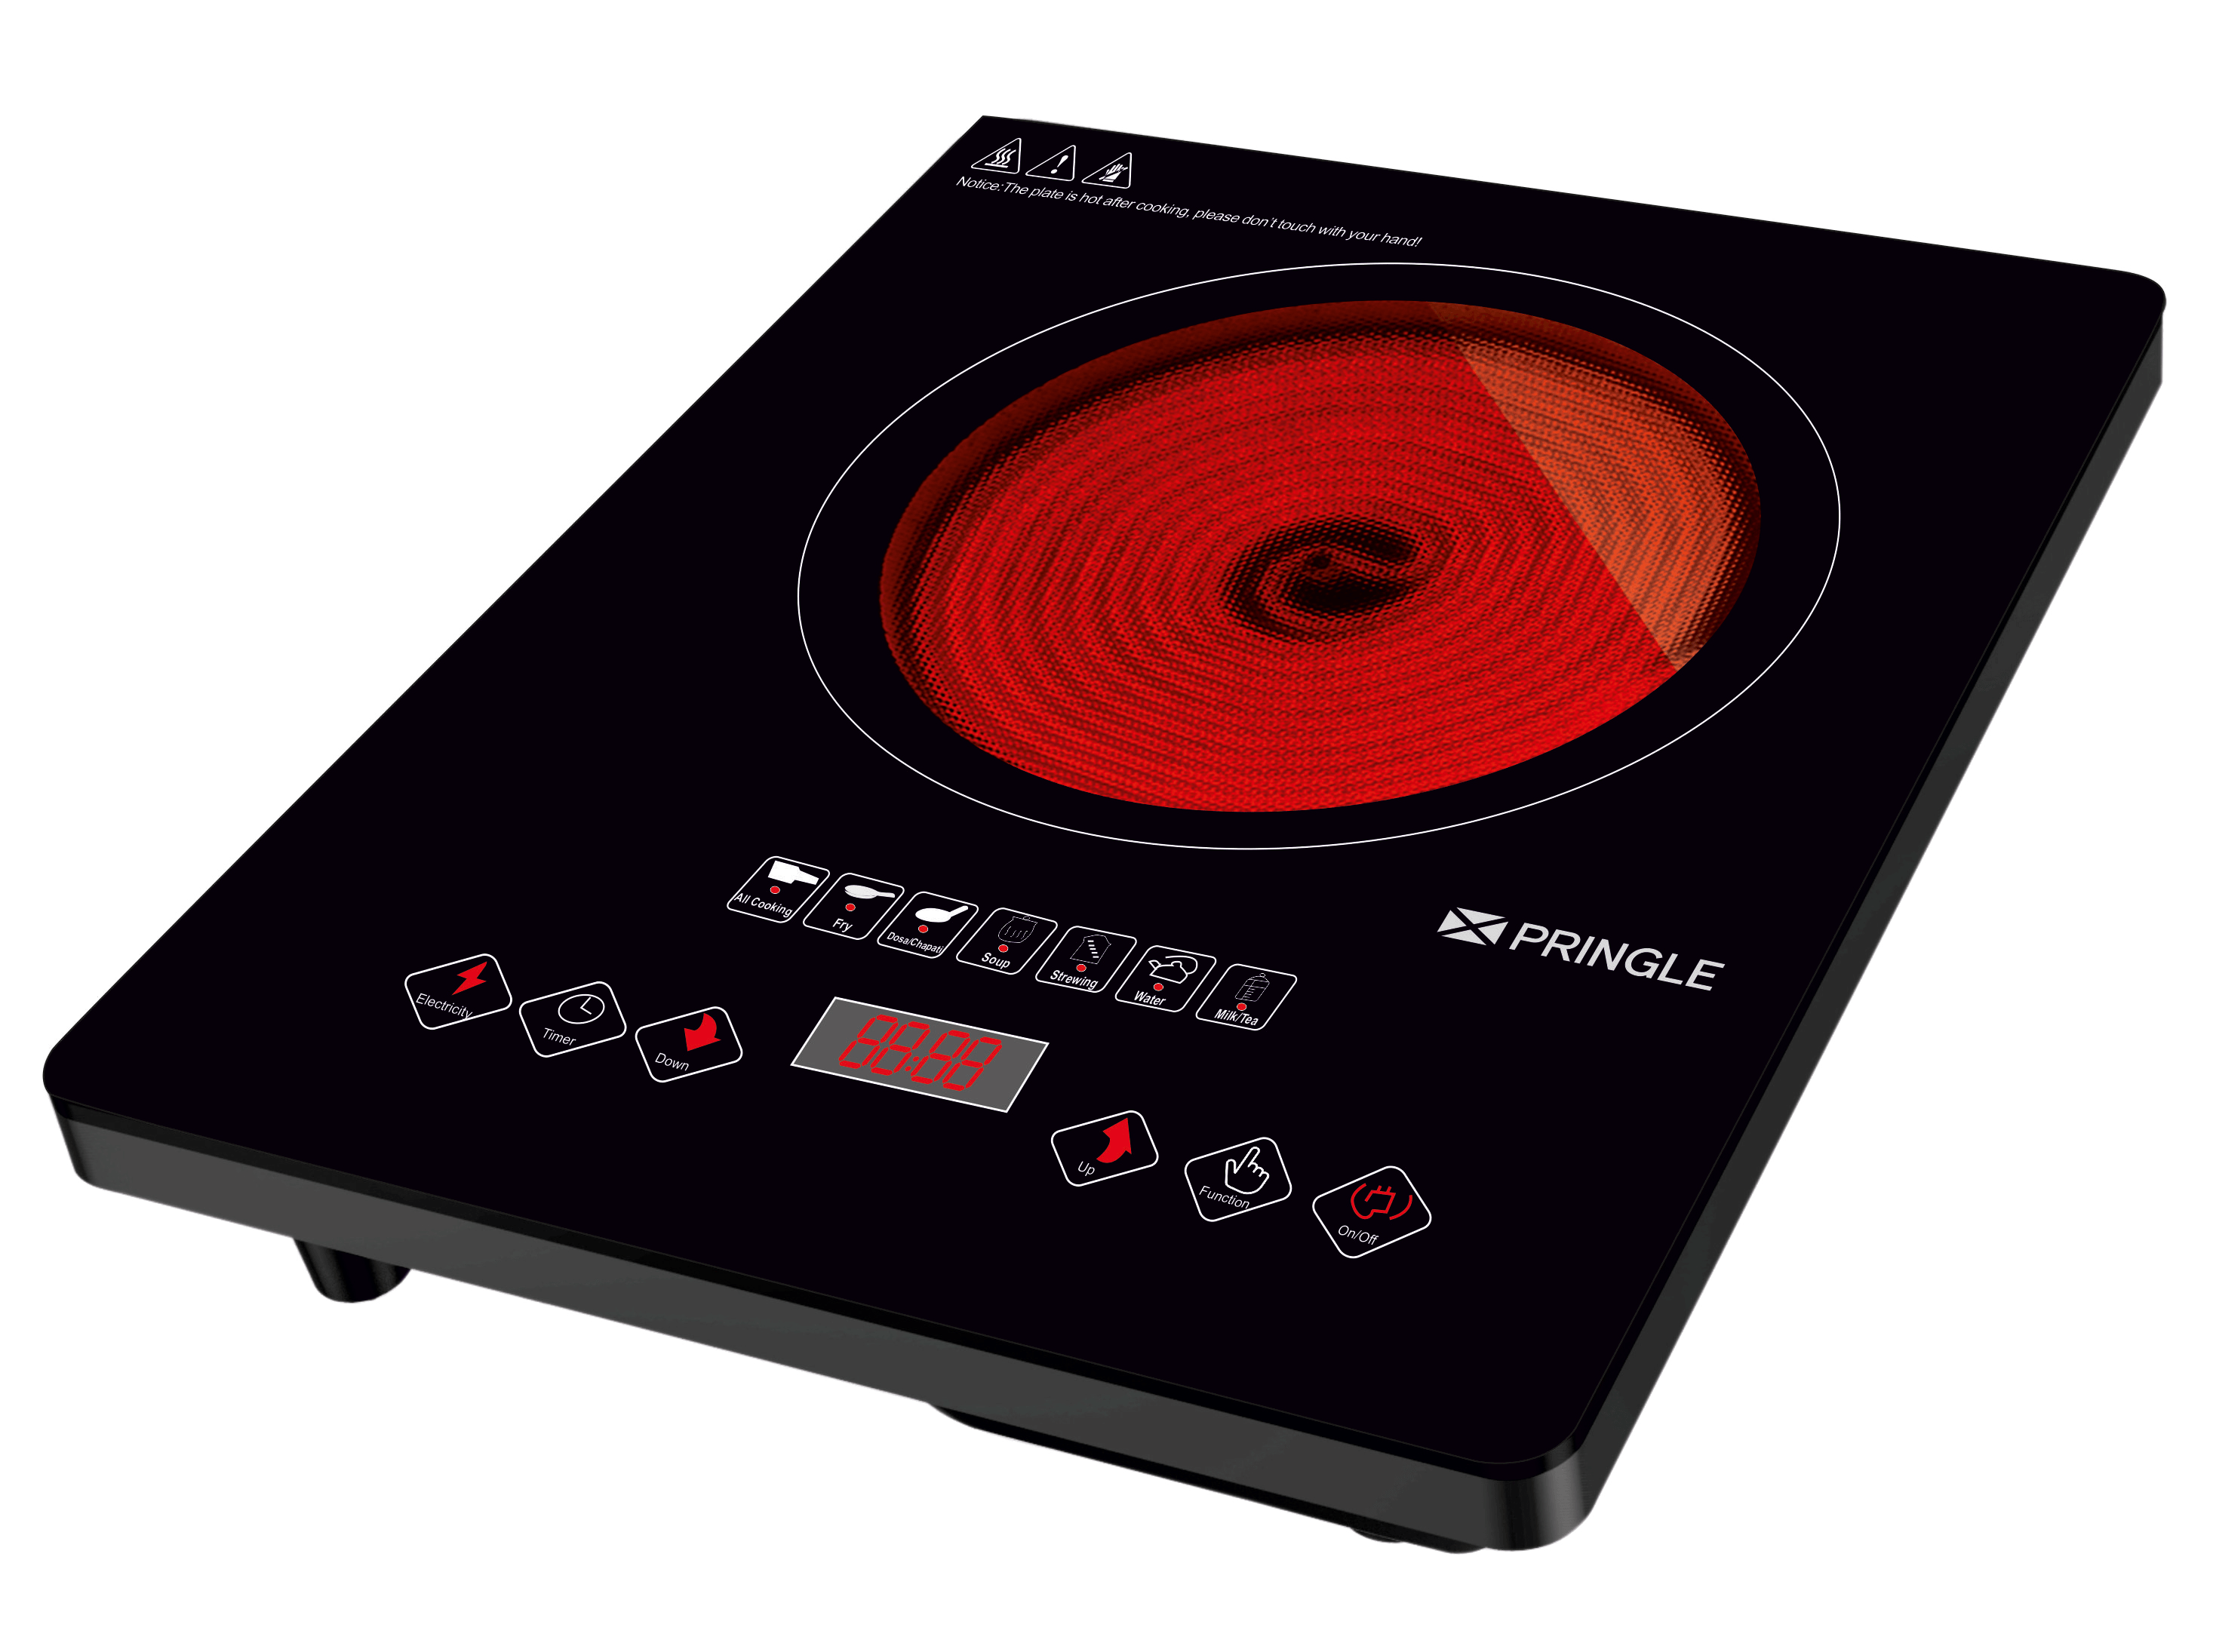 Induction Cooker IR - 02 Infrared / 2000W Metal body Crystal glass 12 Months Warranty - Pringle Appliances